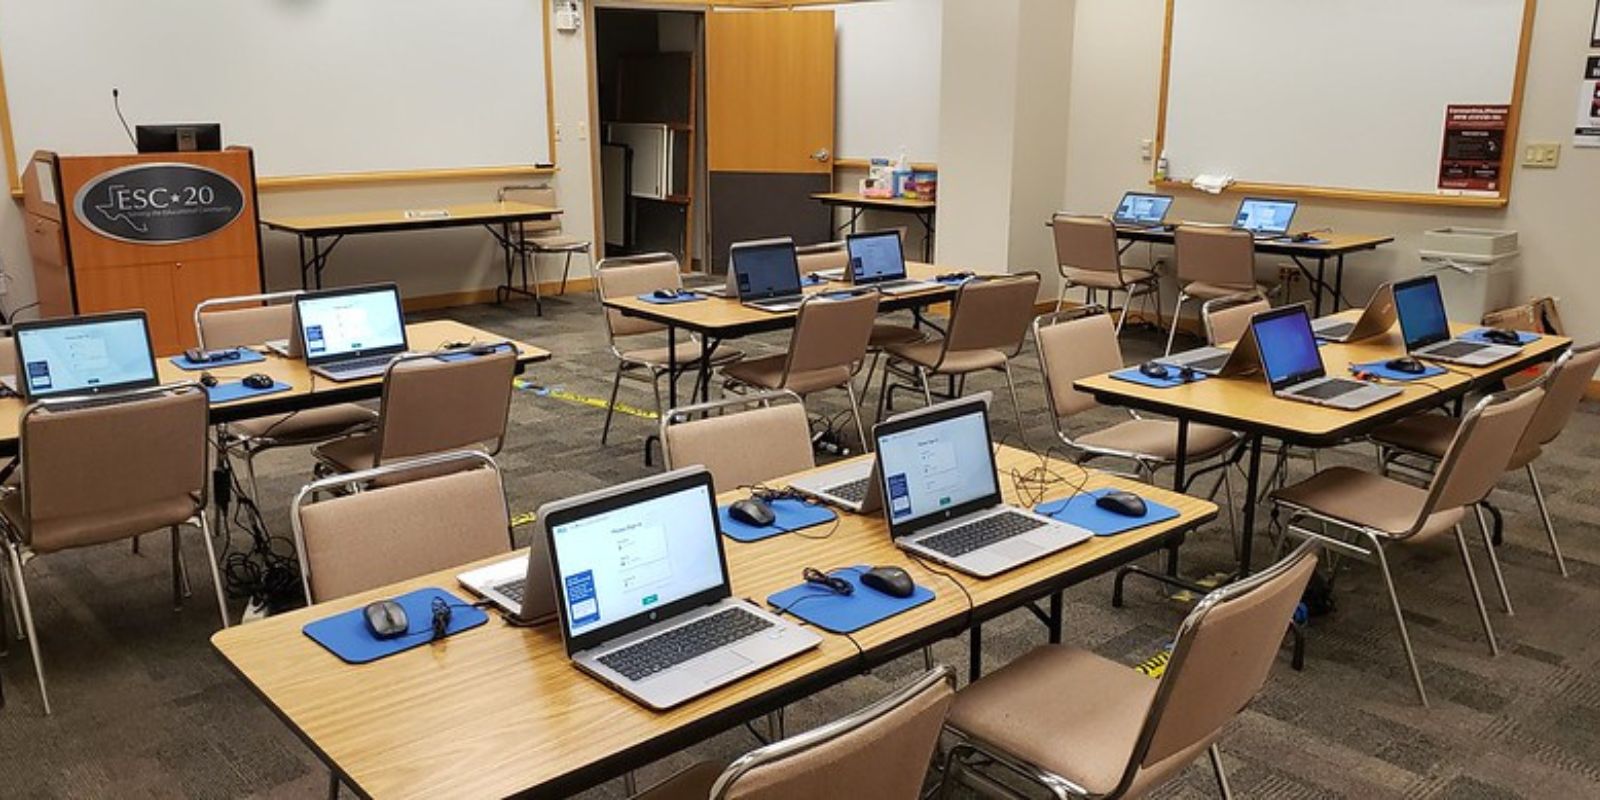 classroom set up for standardized tests on laptop computers